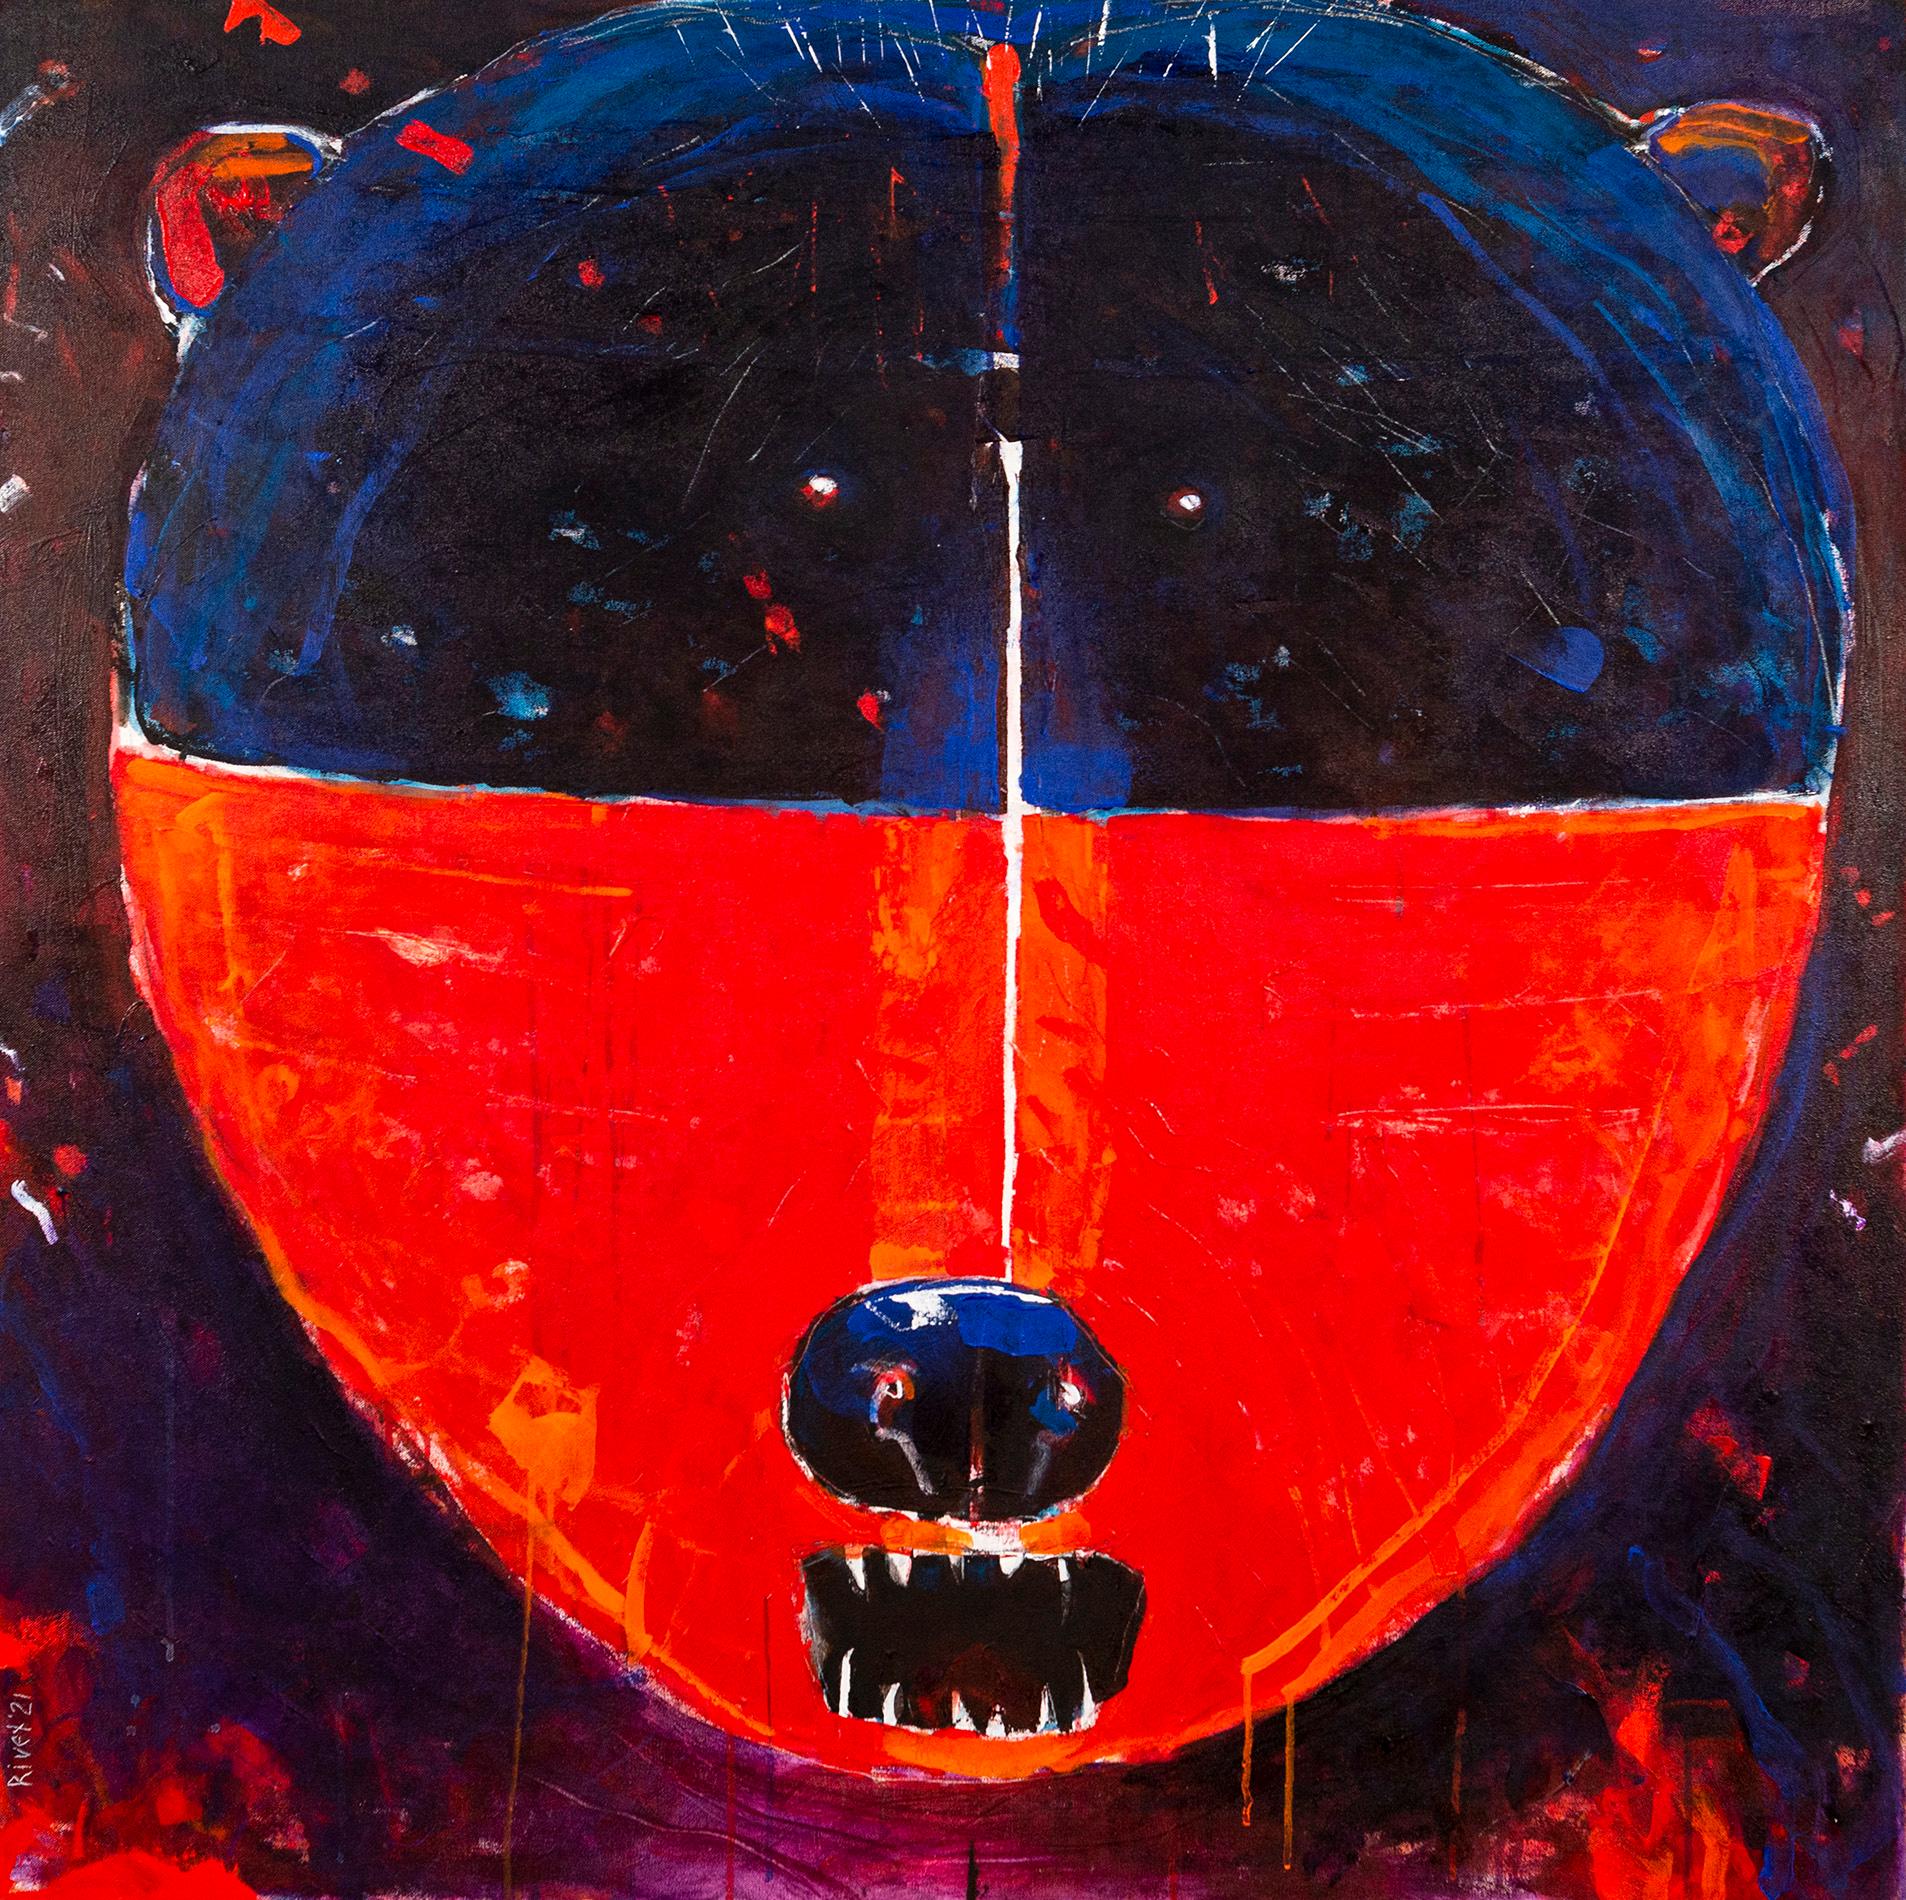 Rick Rivet Figurative Painting - Fire Face Grizzly - colourful, animal, indigenous, figurative, acrylic on canvas